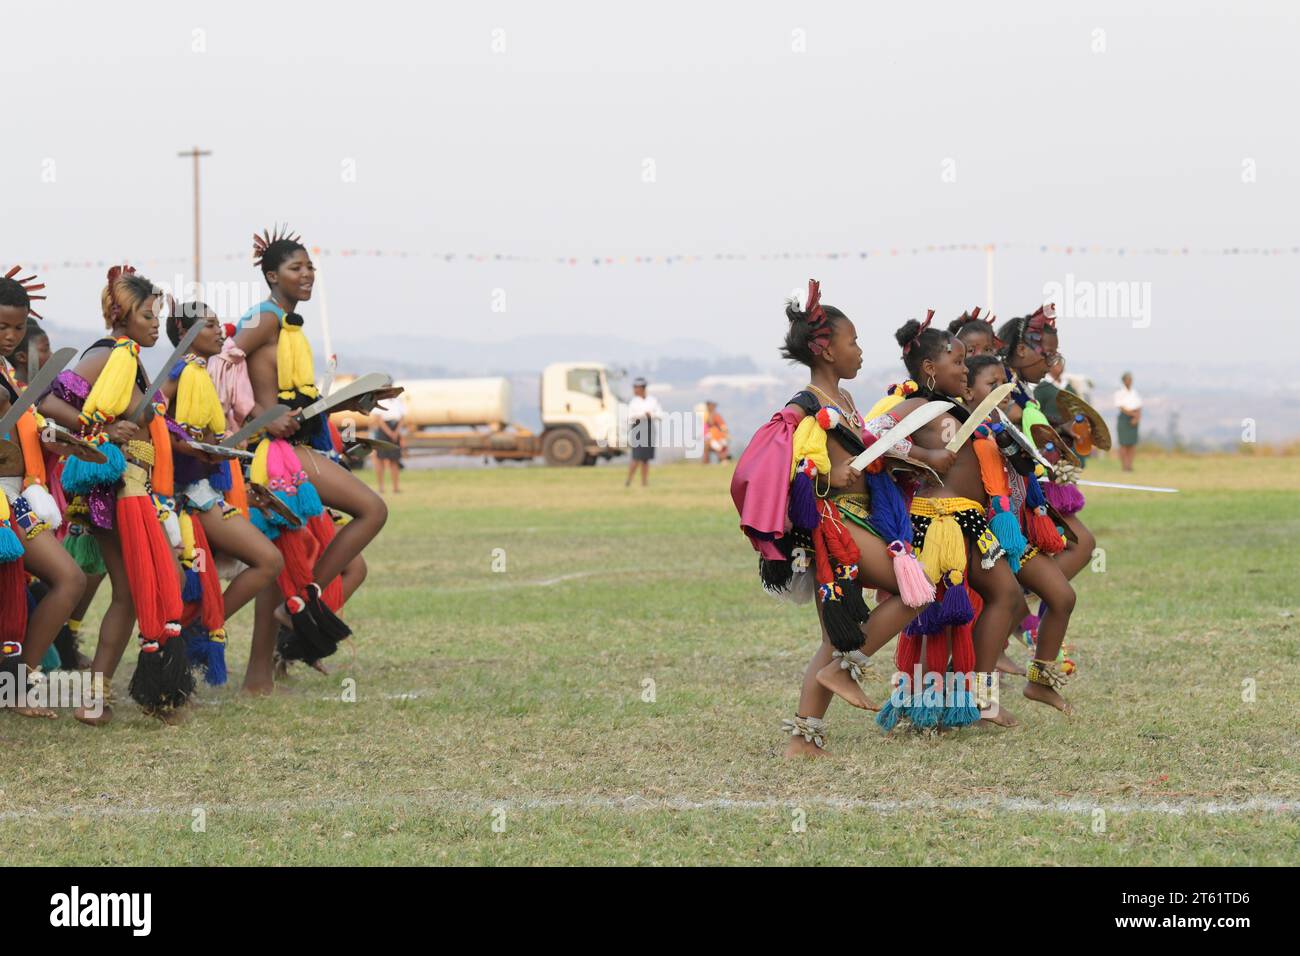 Group of girls dancing with young women in Umhlanga reed dance ceremony 2023, Kingdom of Eswatini, African culture event, females in traditional dress Stock Photo